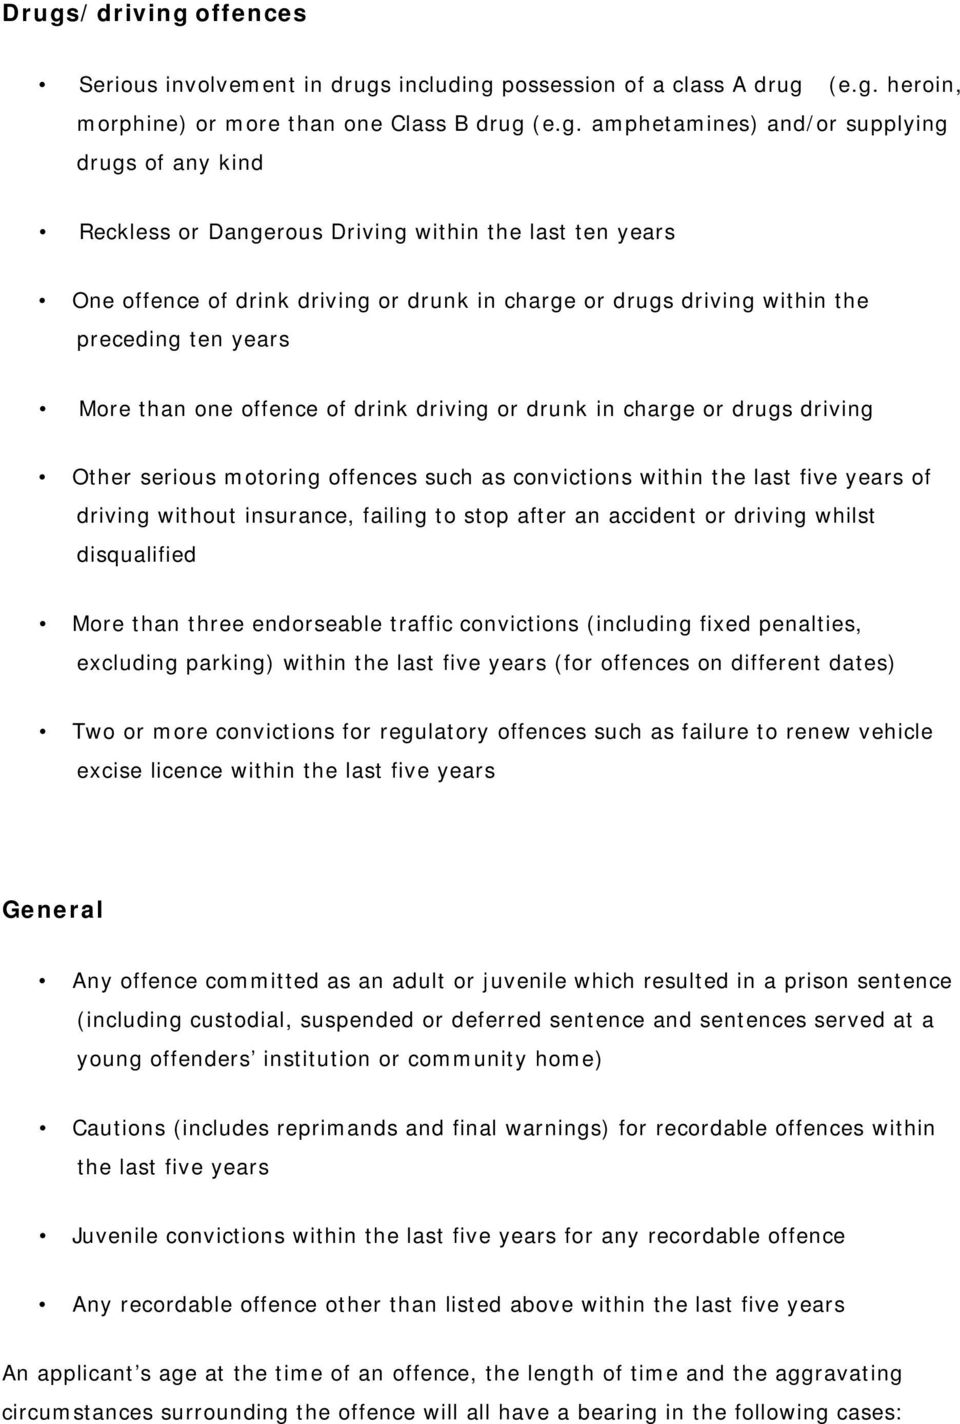 in charge or drugs driving Other serious motoring offences such as convictions within the last five years of driving without insurance, failing to stop after an accident or driving whilst